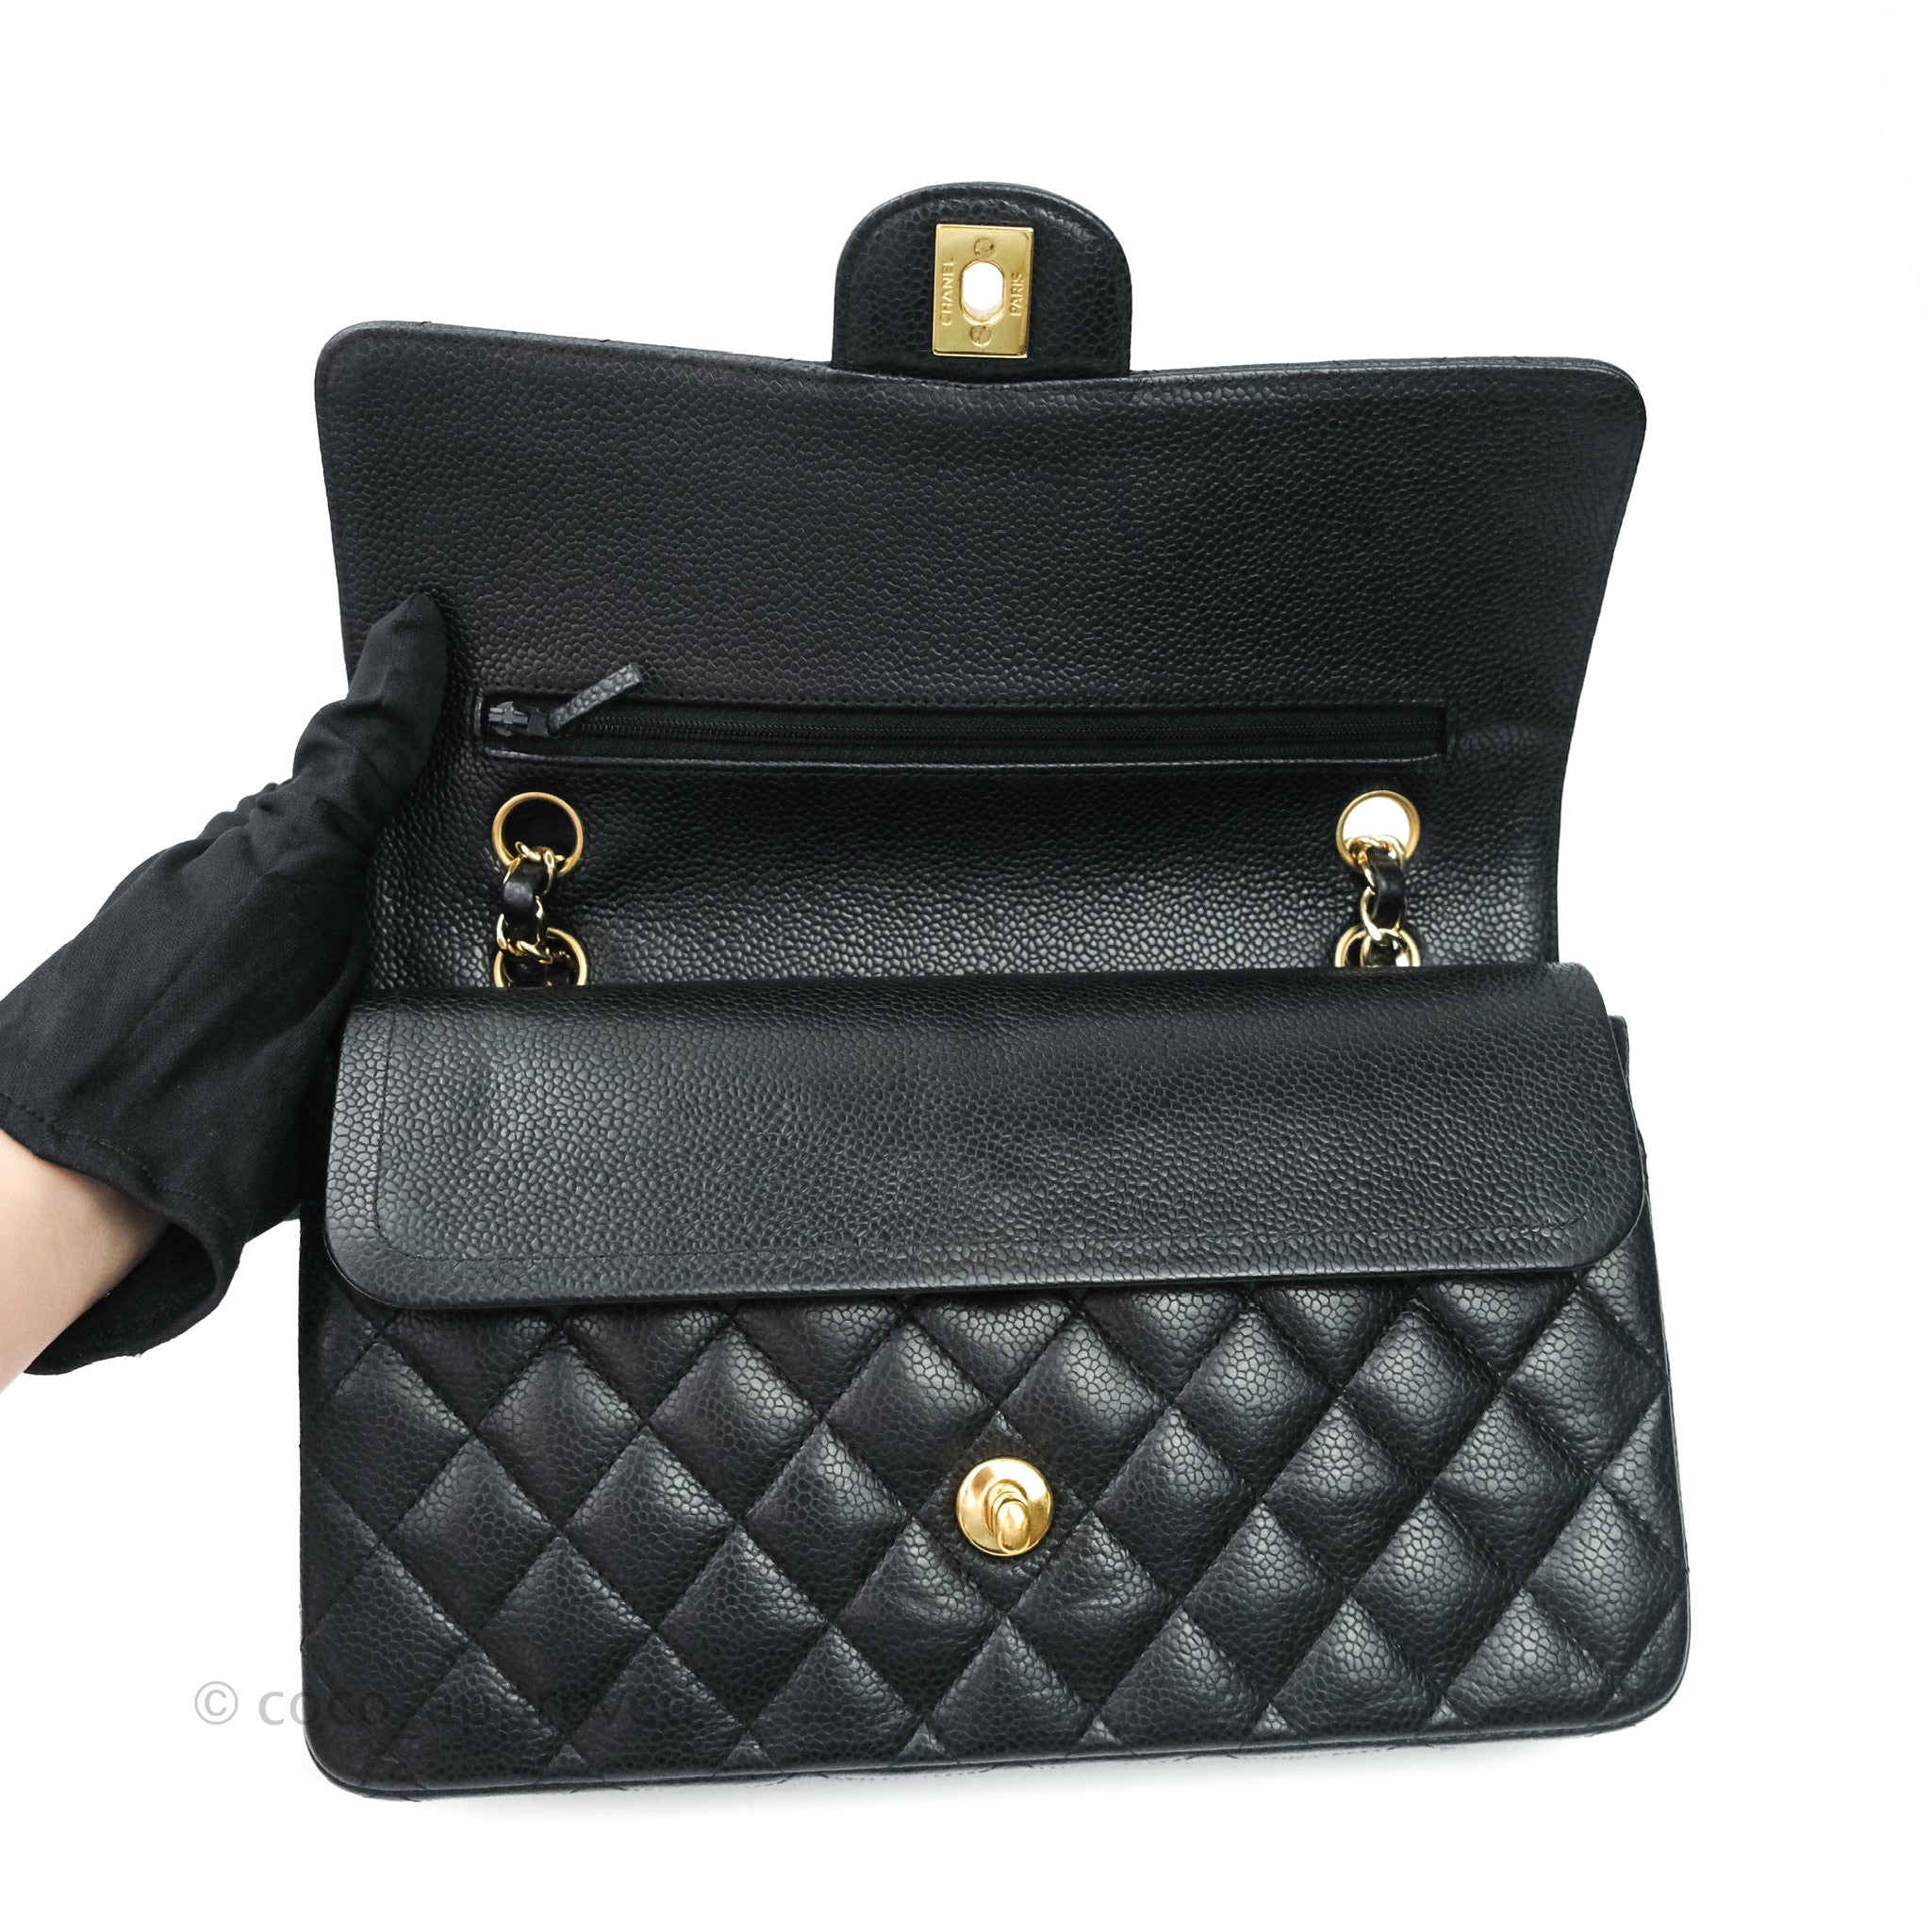 Chanel Classic Medium Double Flap Bag in Black in Caviar with Gold Hardware   SOLD